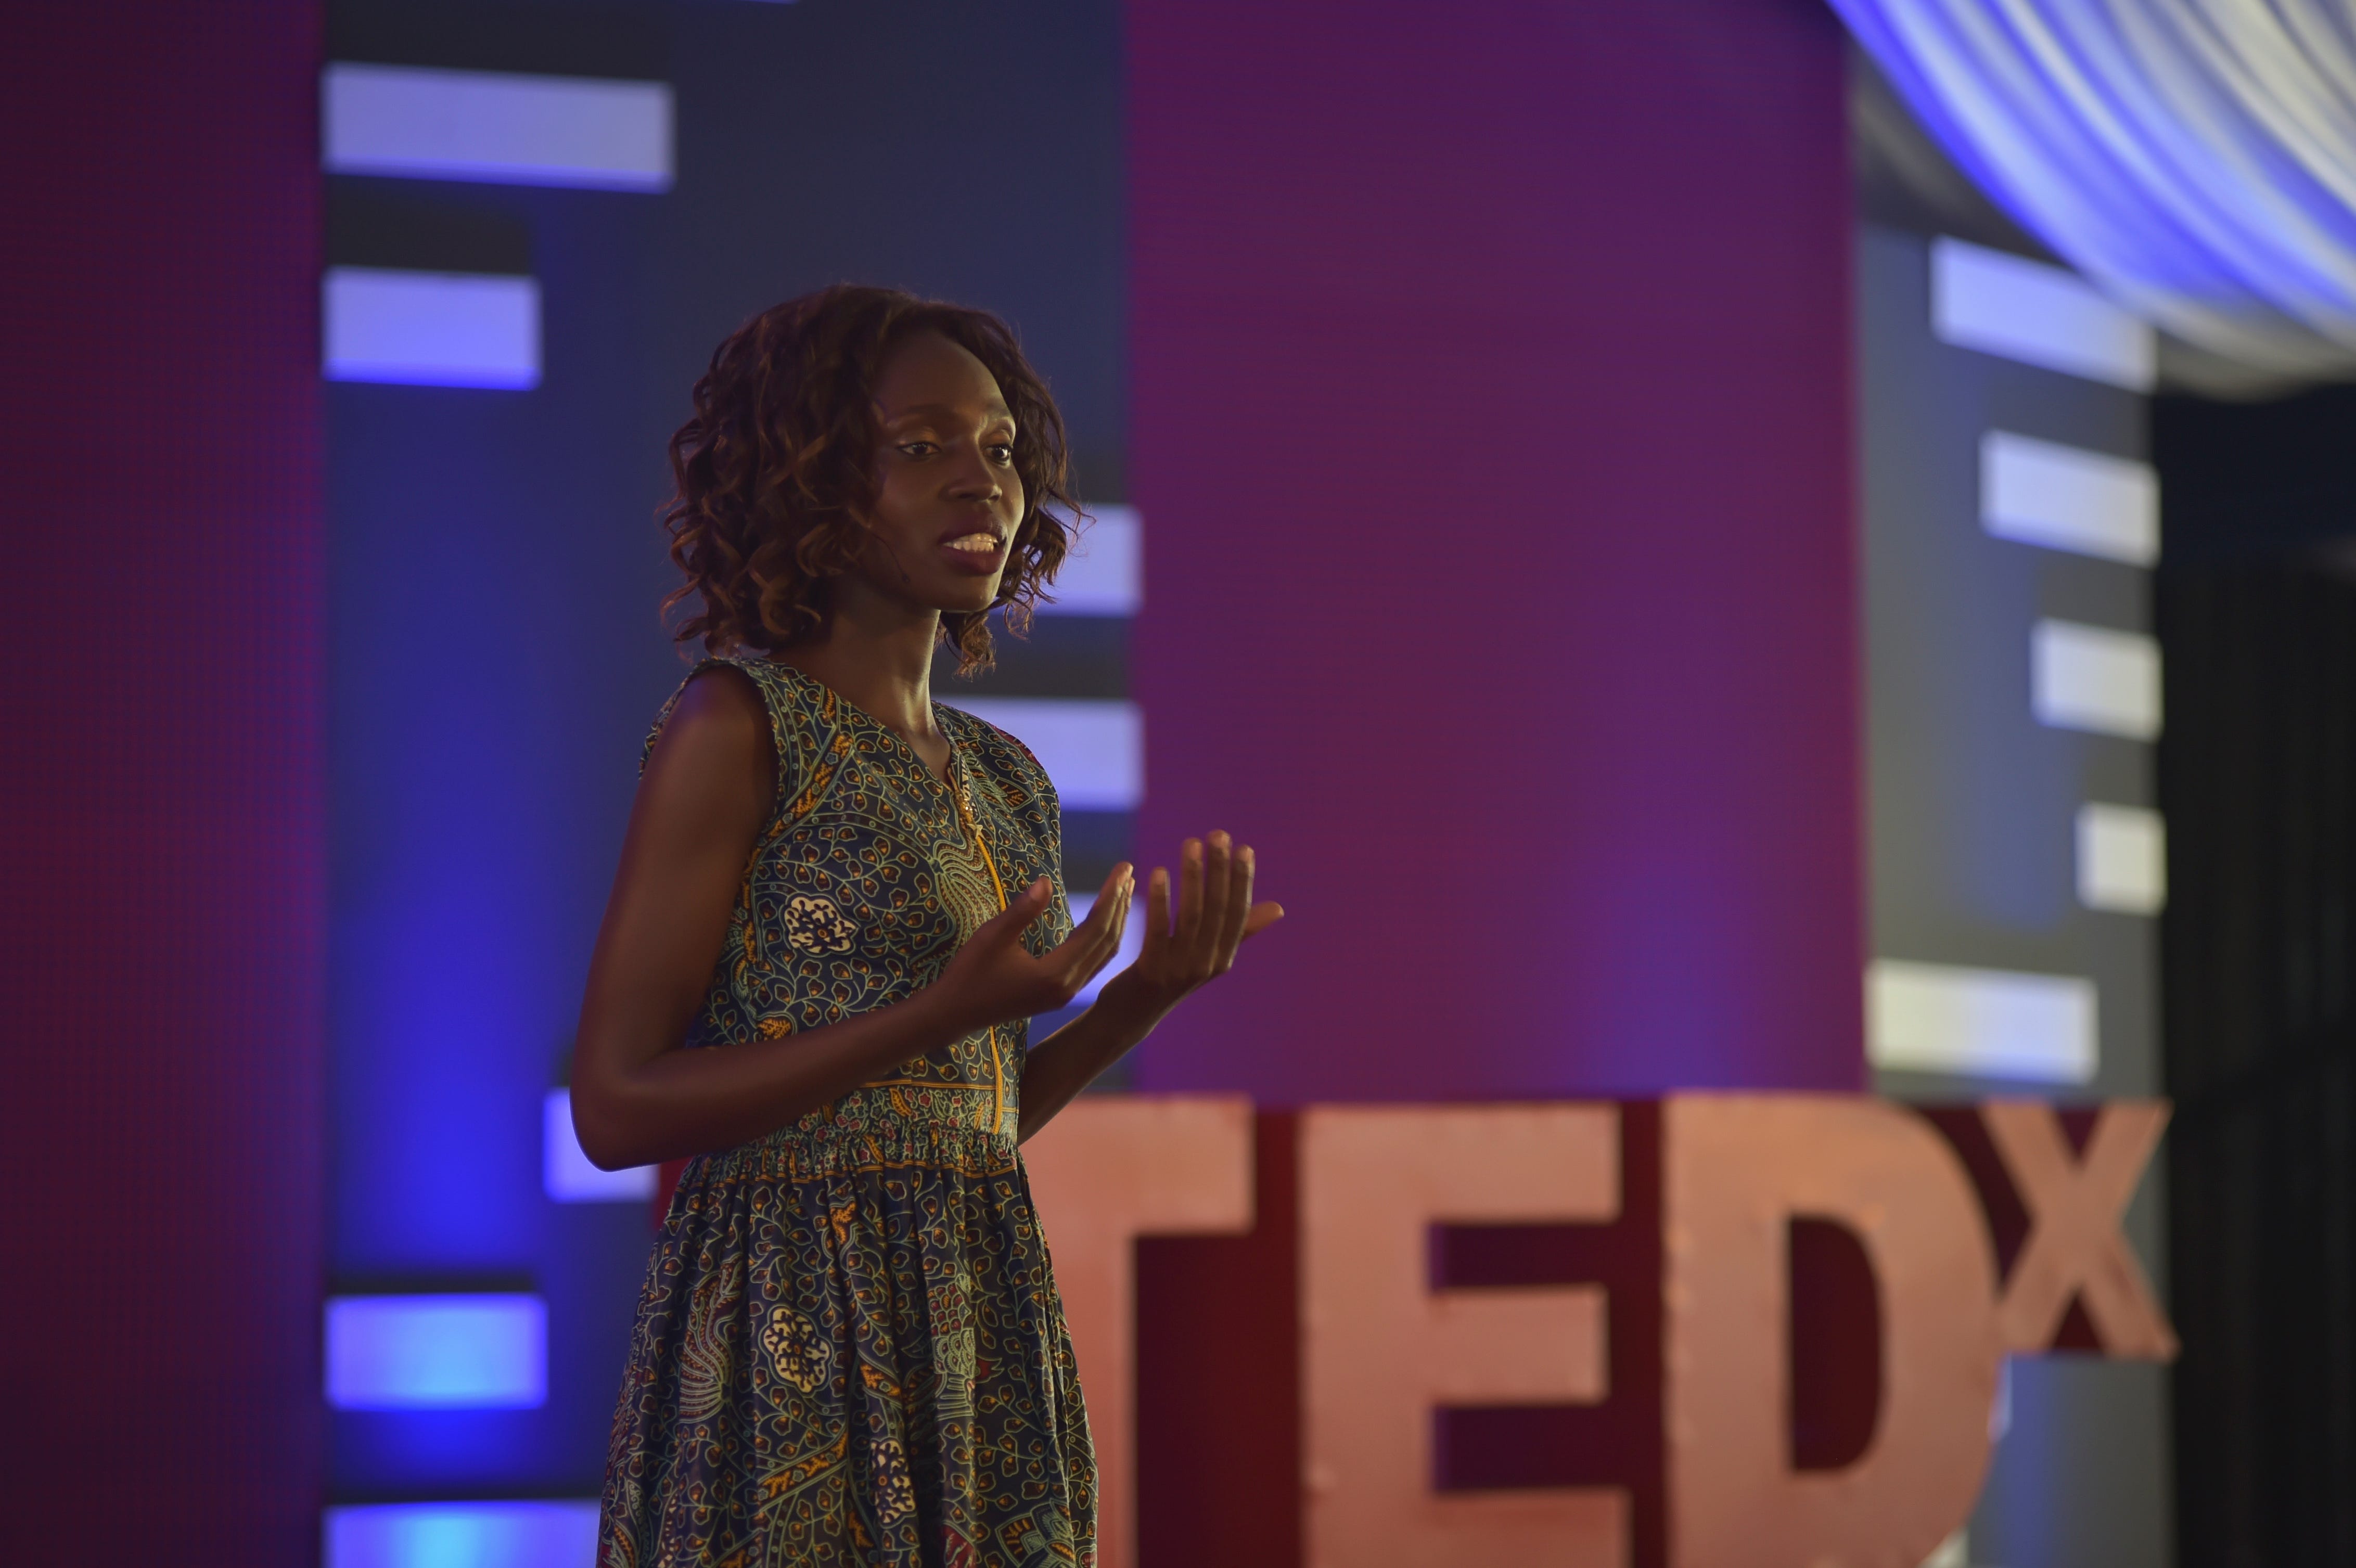 Refugee speakers steal show at historic TEDx event | by UN Refugee Agency |  Medium